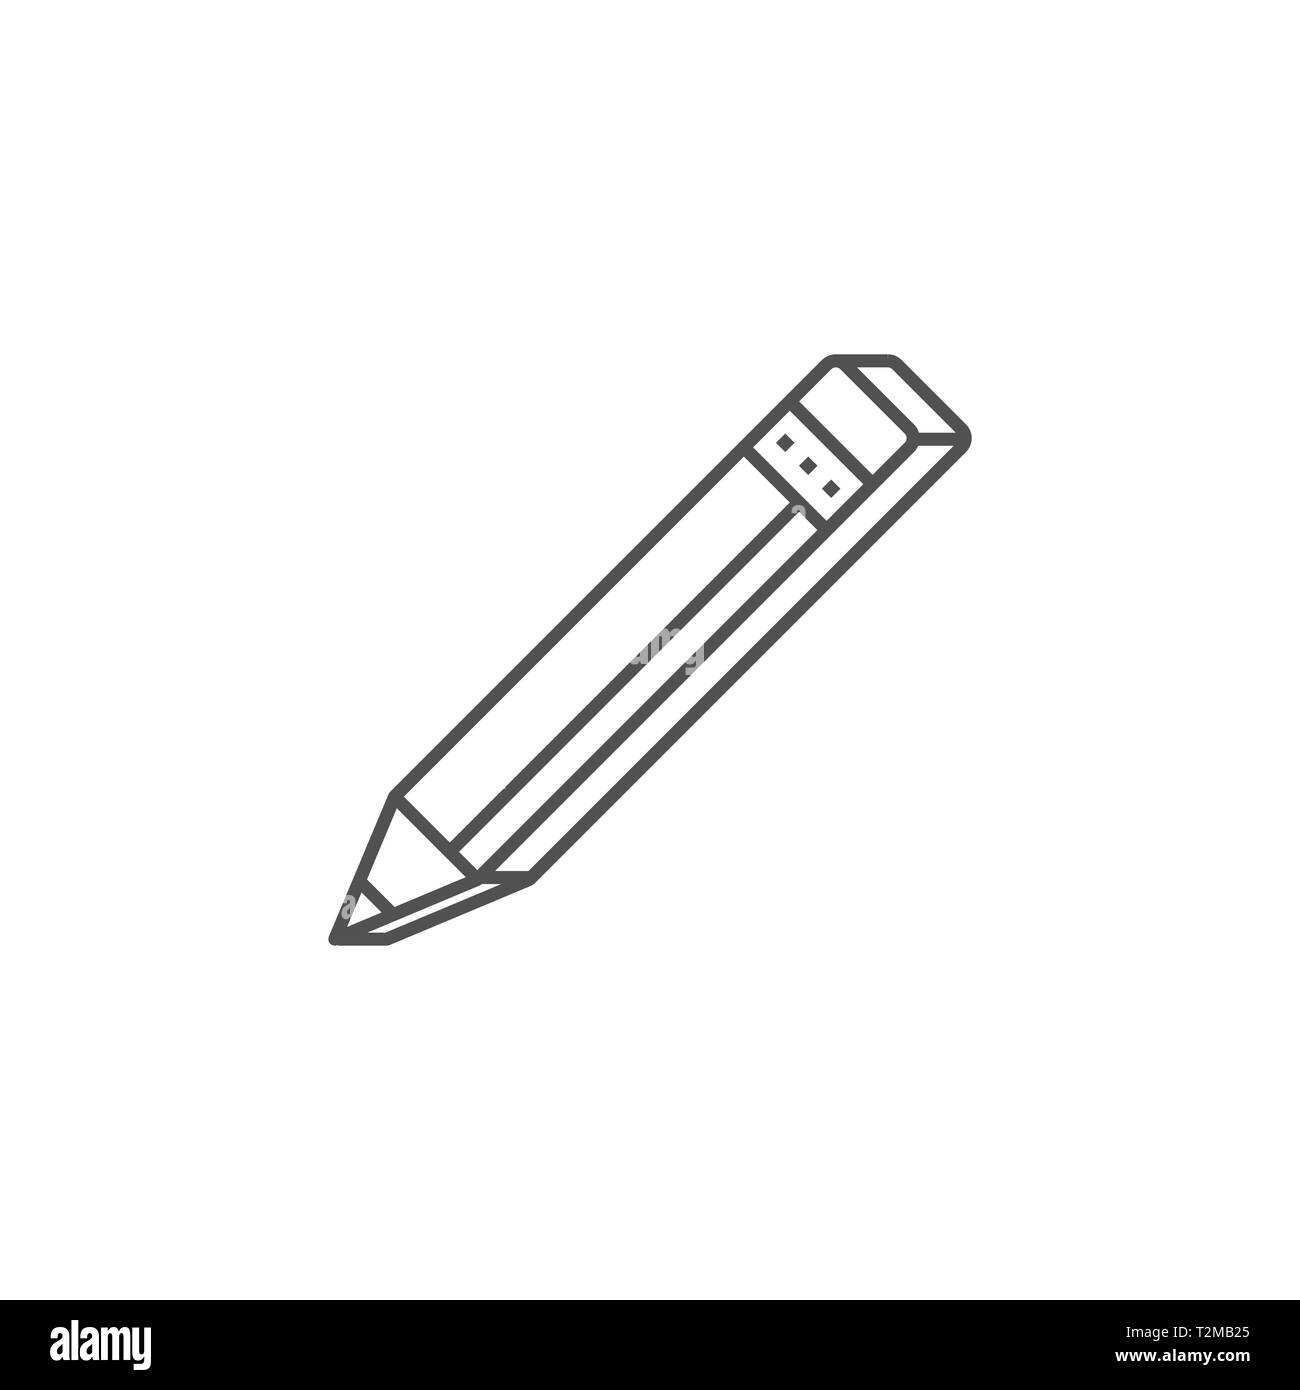 Pencil Icon. Pencil Related Flat Vector Icon. Isolated on White Background. Editable Stroke. Stock Vector